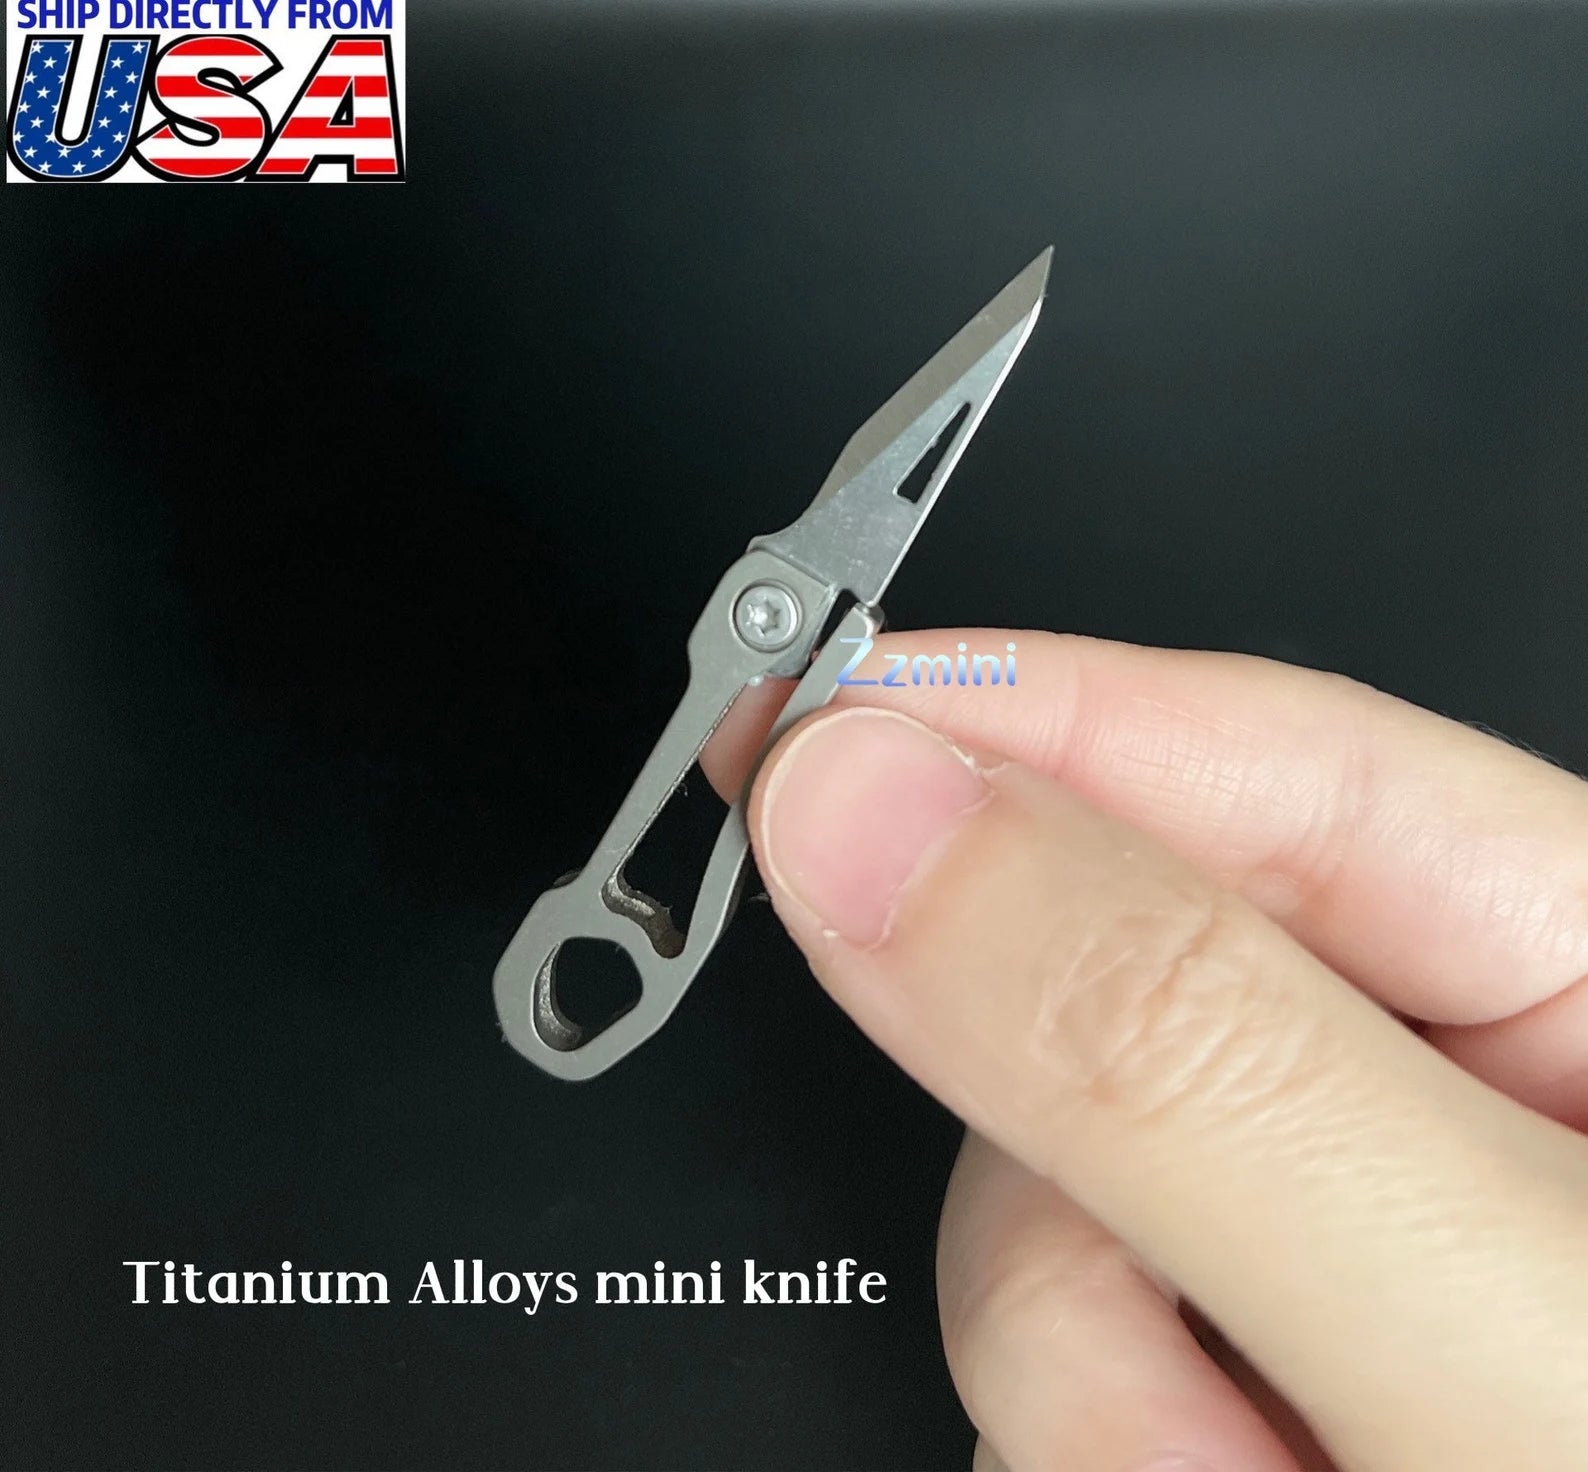 World Smallest 100% Real Titanium Alloys Miniature Tiny Working Pocket Knife For Real Mini Cooking Gift